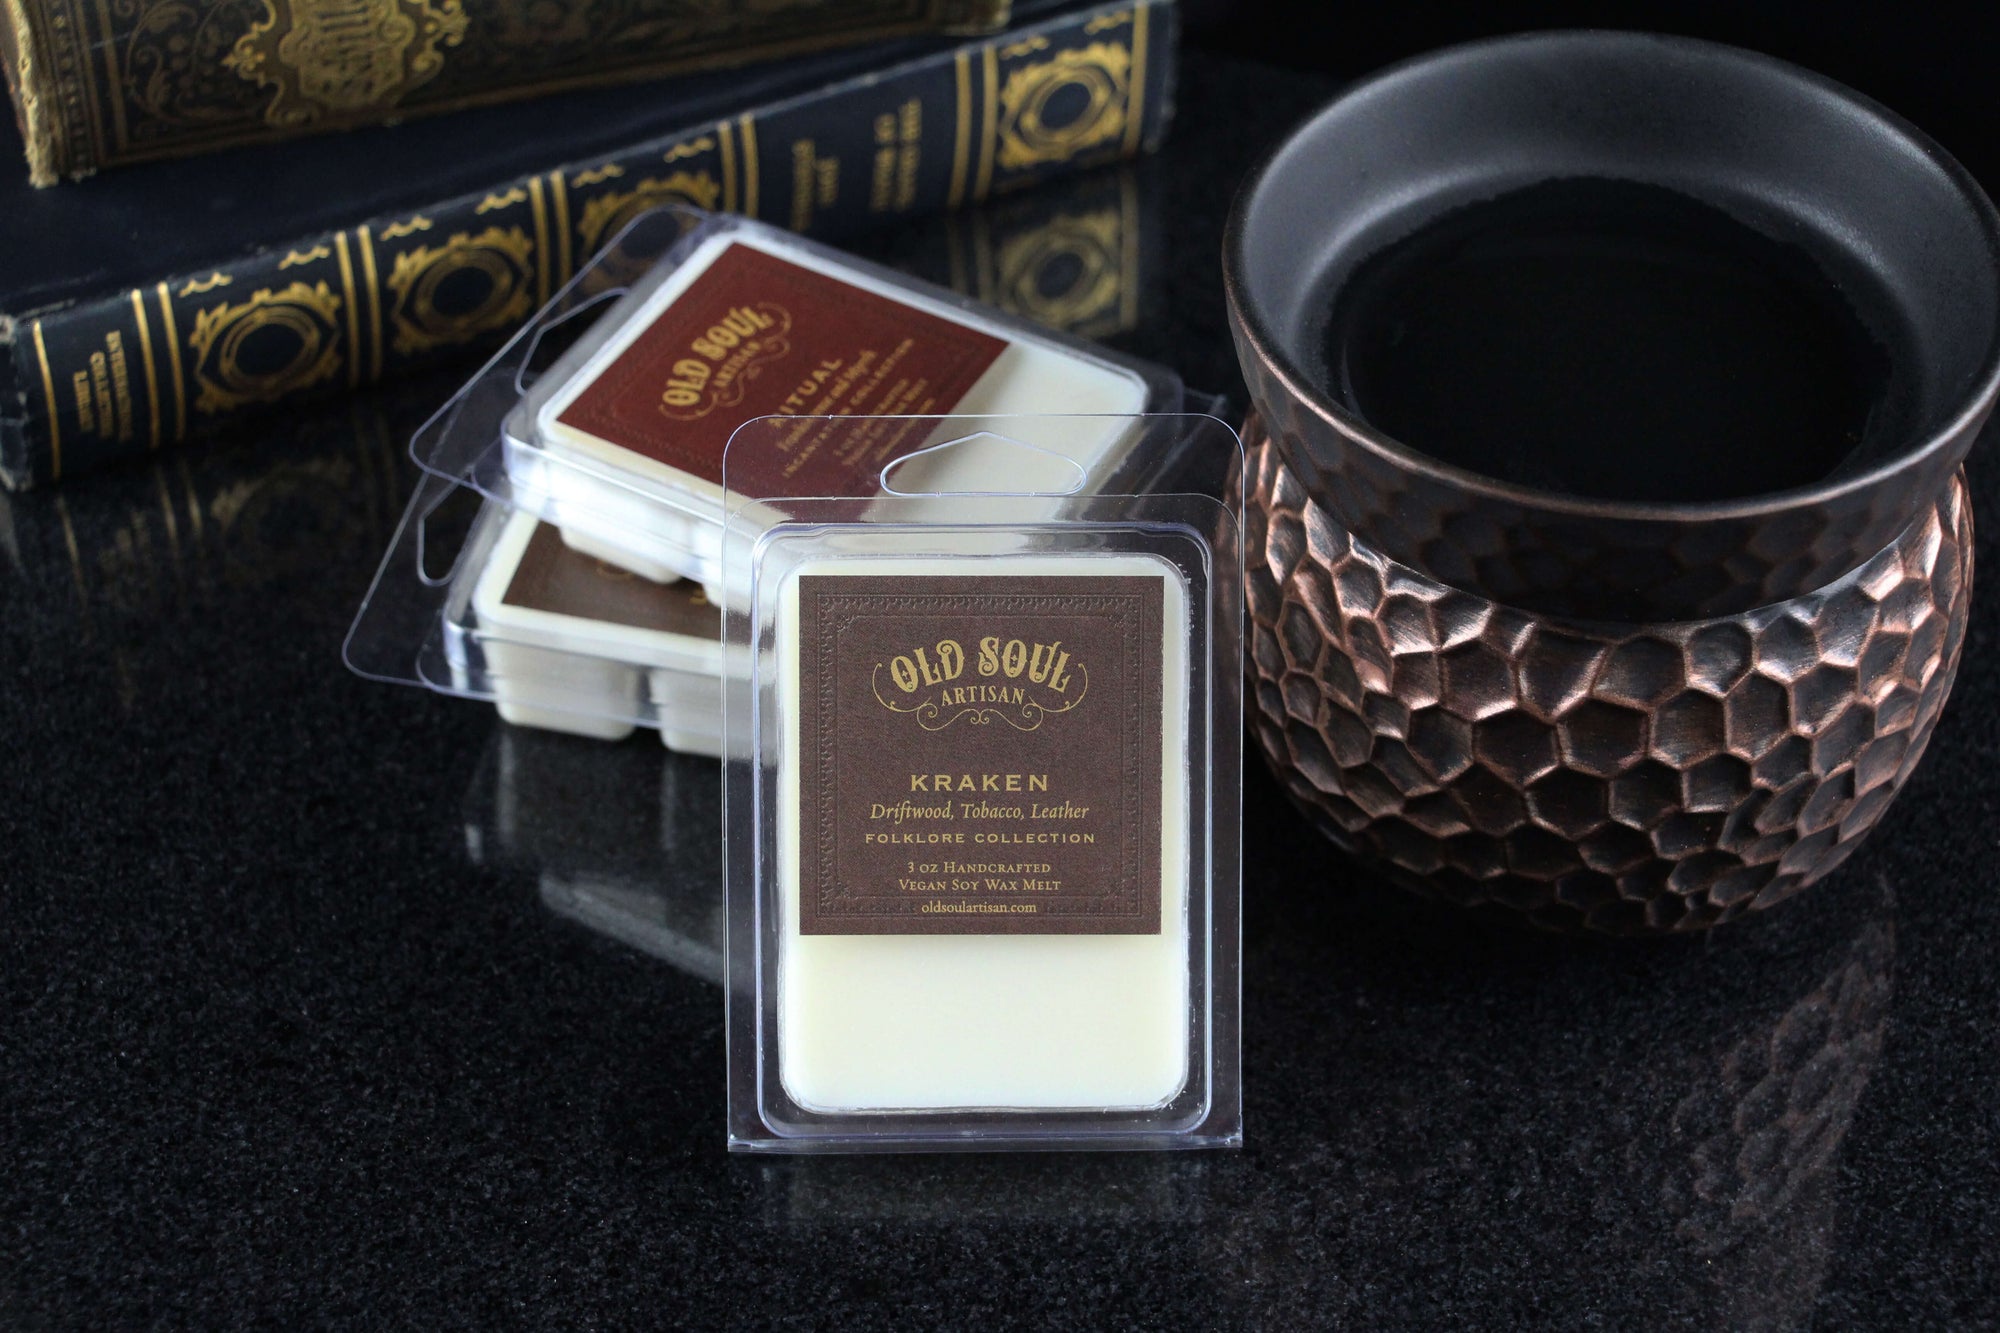 Mr. Hyde Wax Melts (toasted almond and cherry)